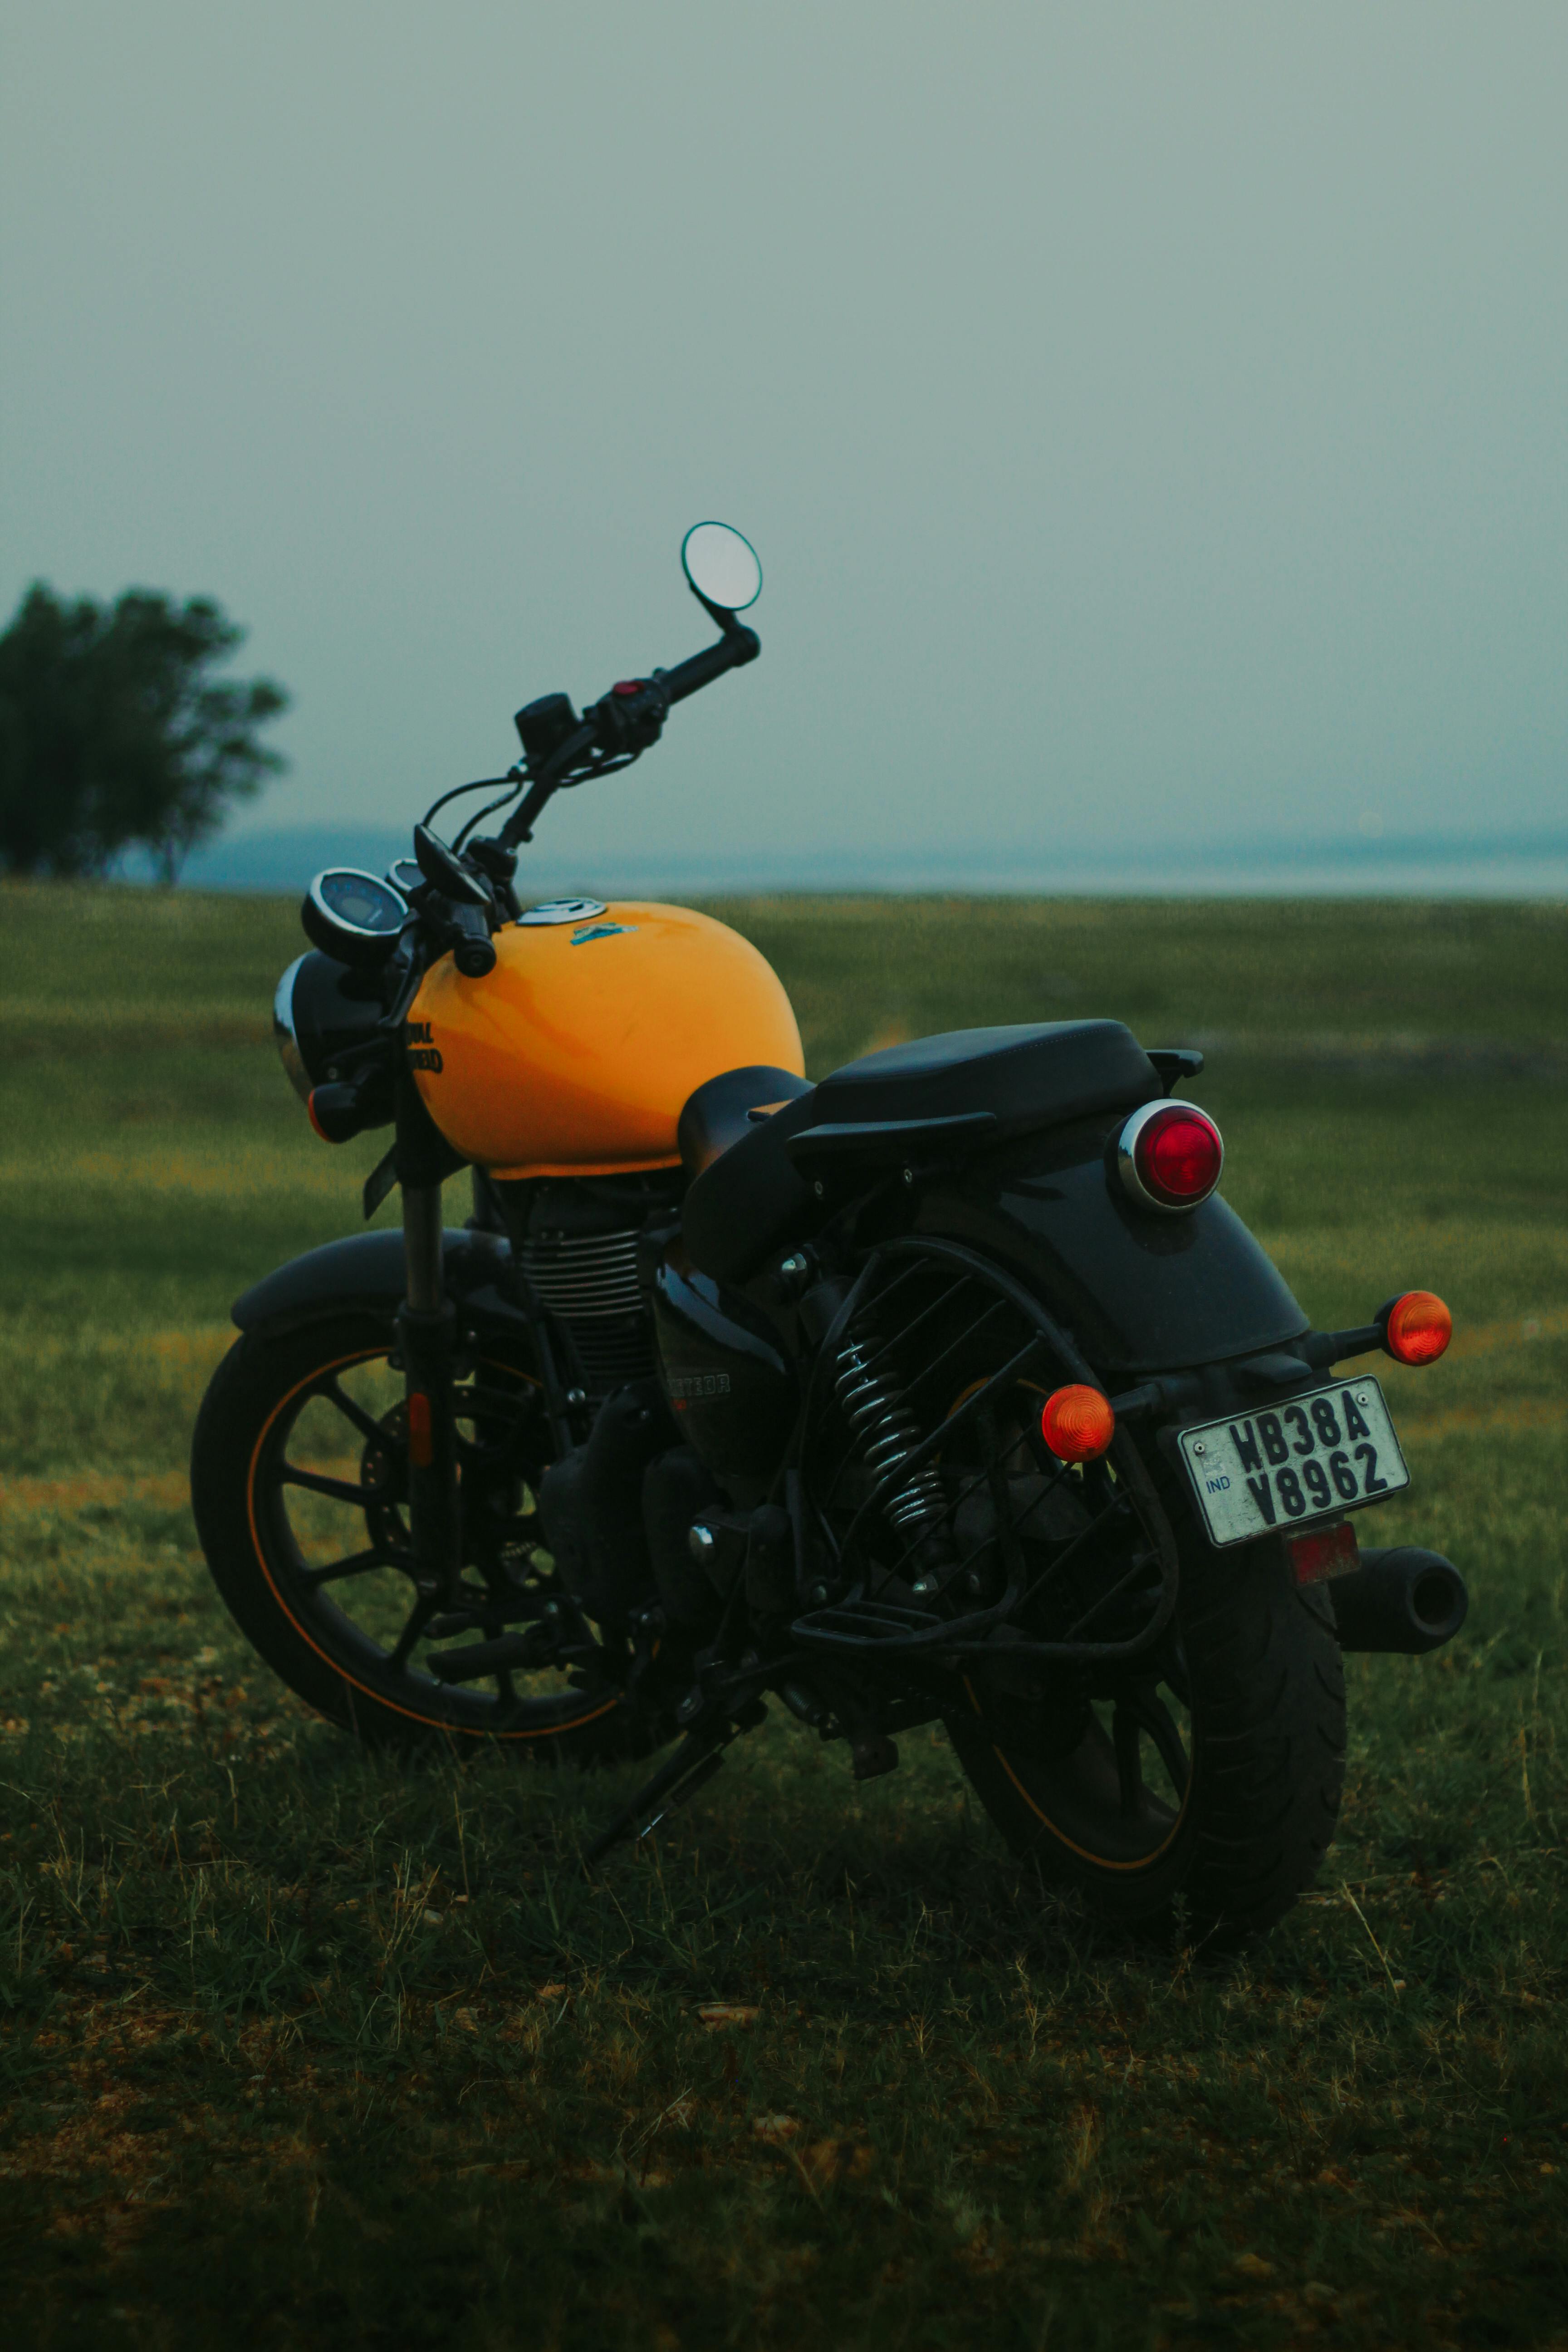 A Black and Yellow Motorcycle Parked on a Grass · Free Stock Photo